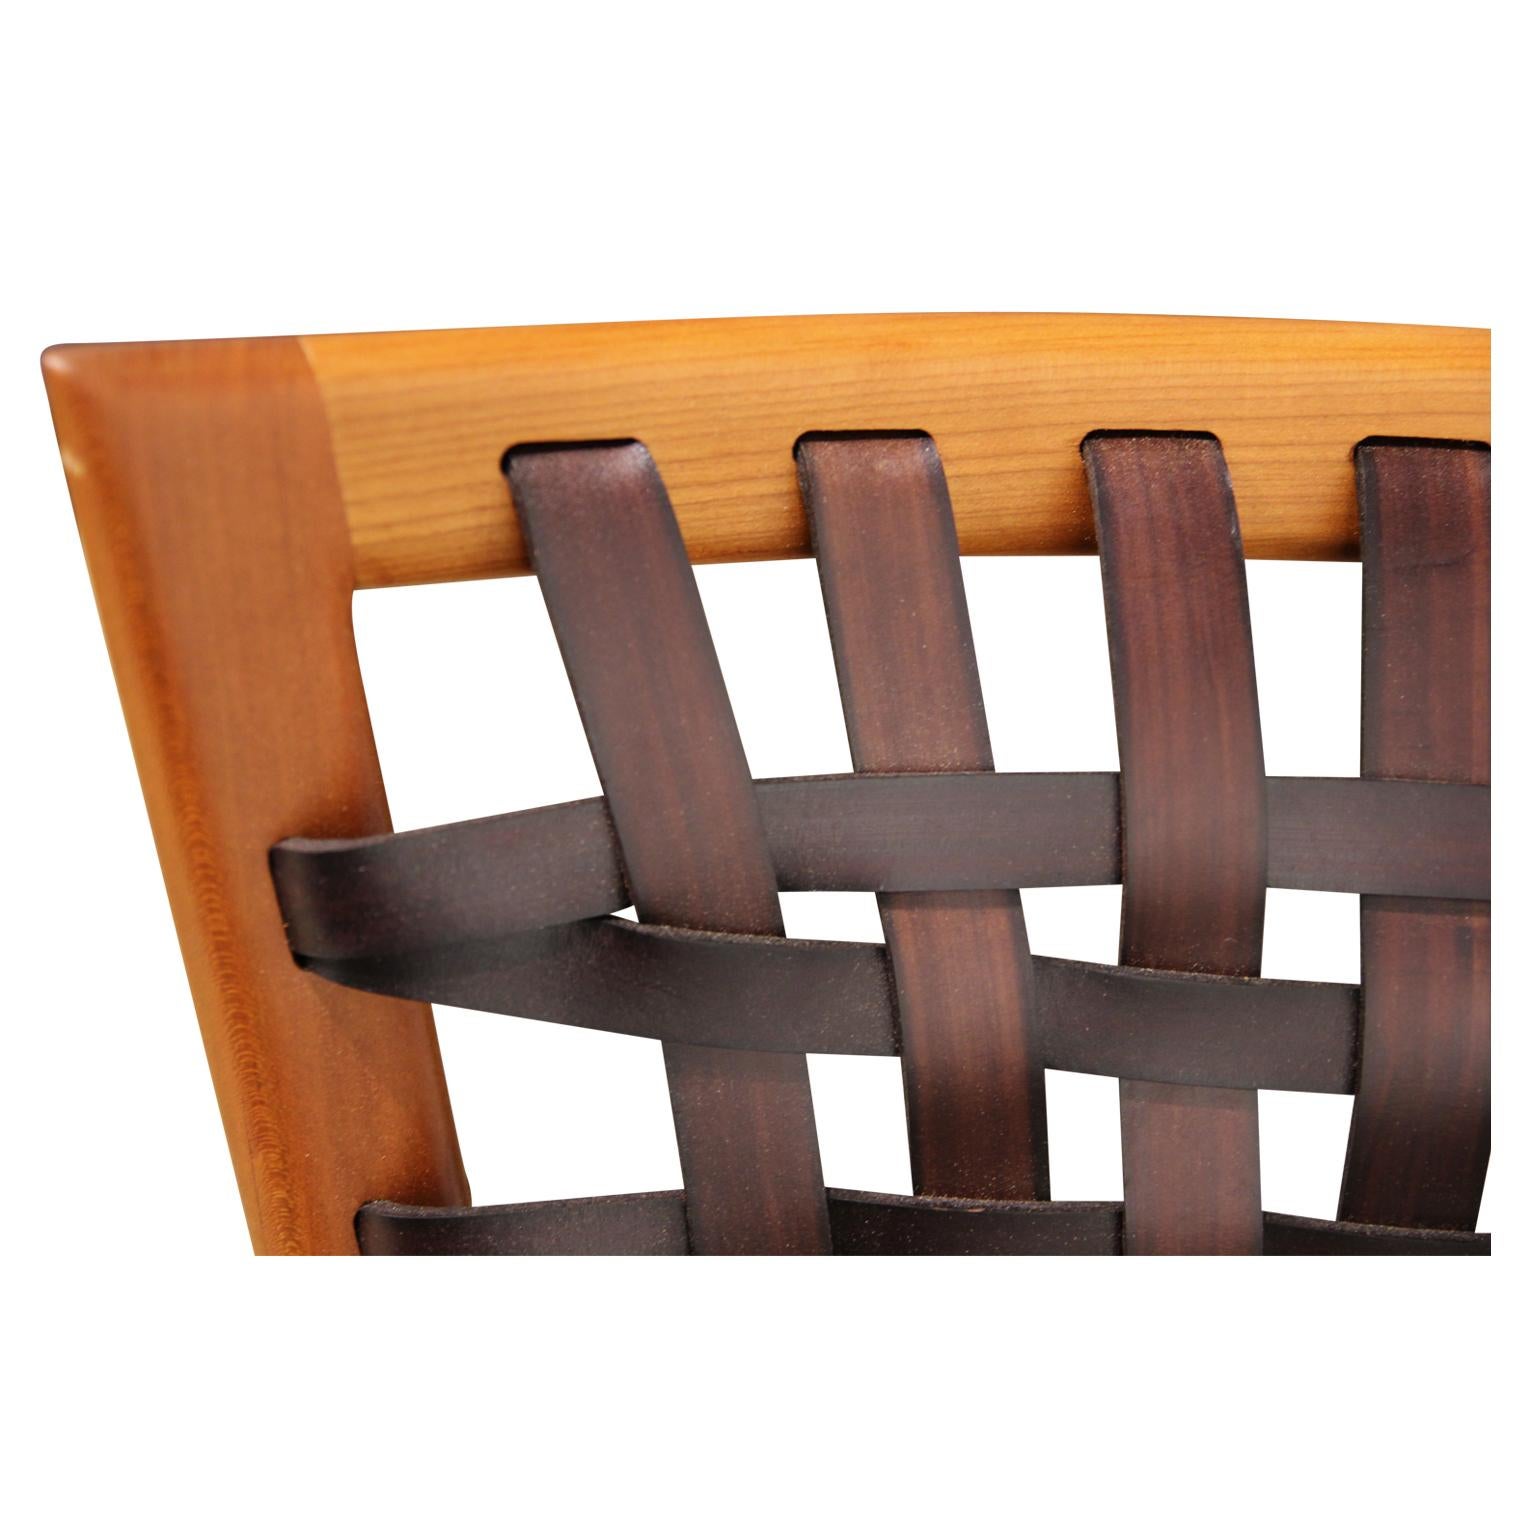 Set of 6 Sculptural Modern Dining Chairs with Woven Leather by Roger Deatherage 1